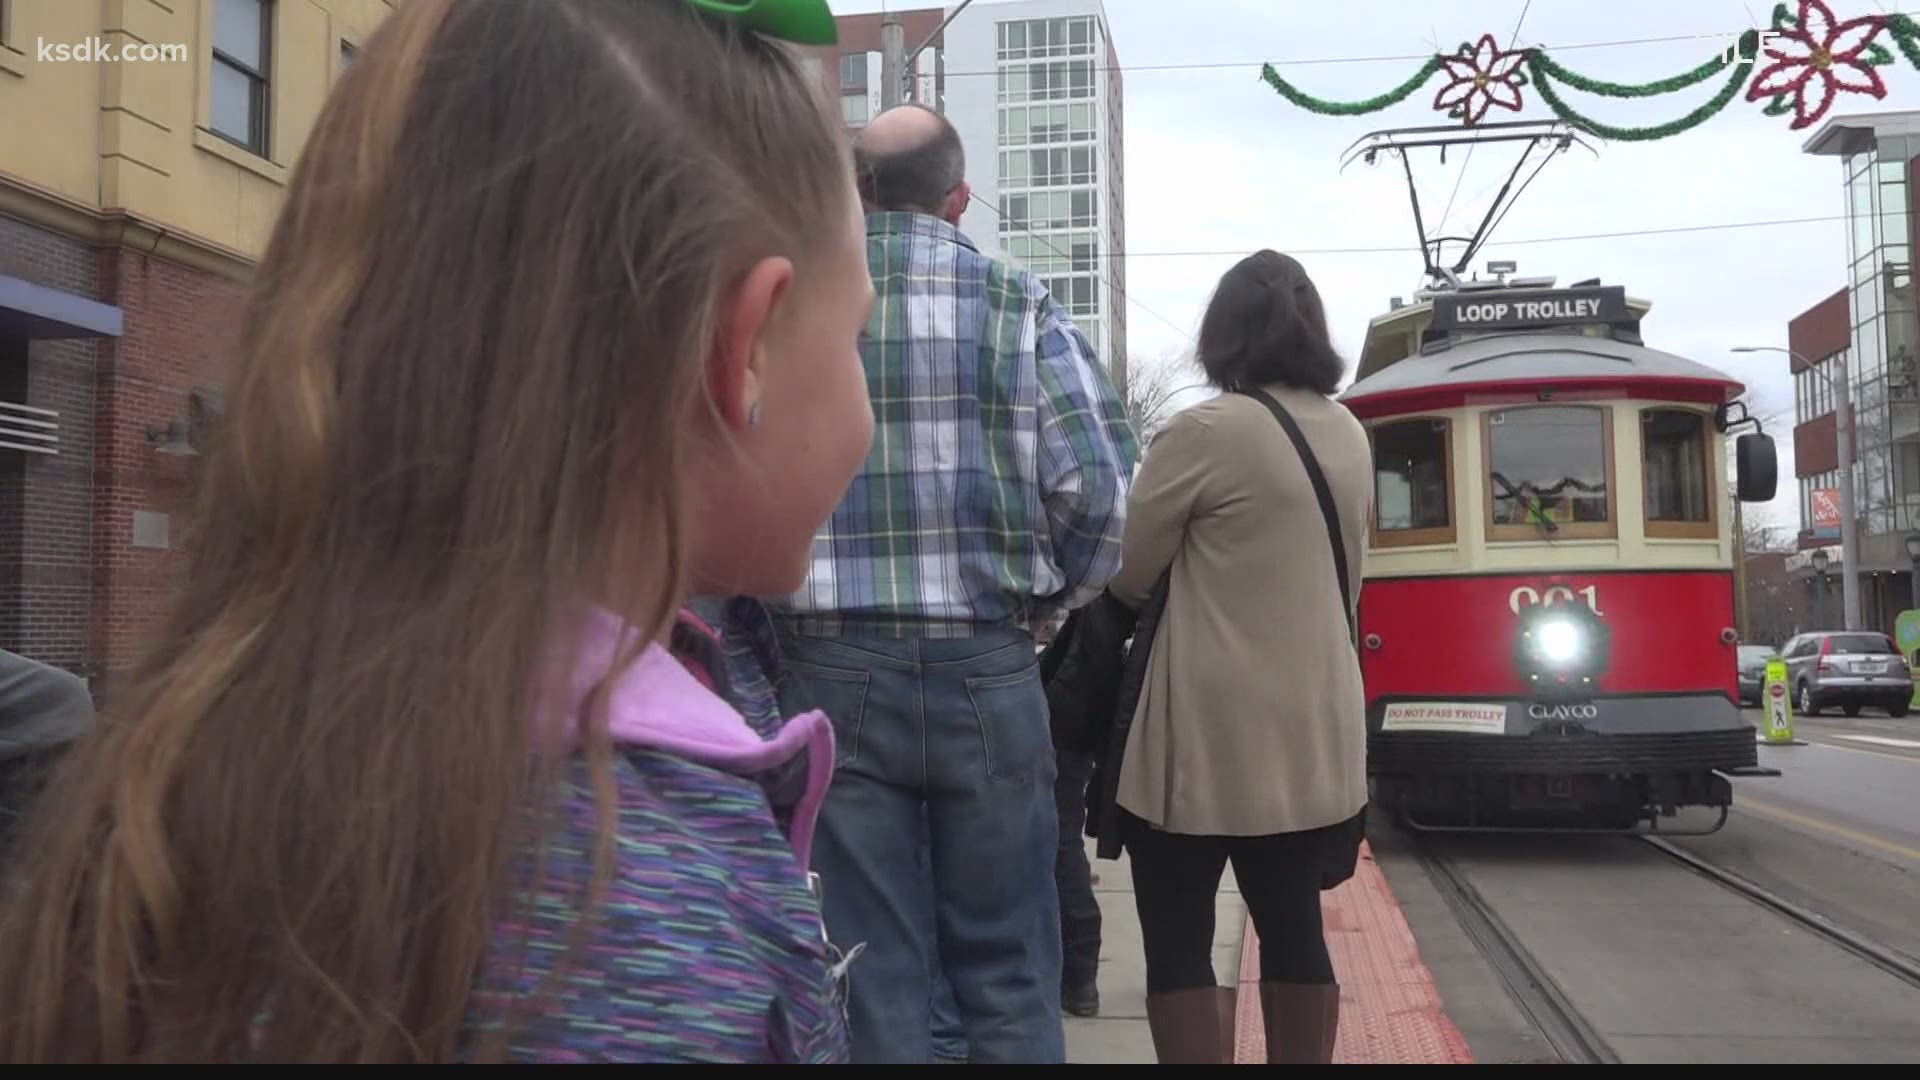 The trolley closed in December 2019 after facing low ridership and difficulties putting into operation the number of streetcars initially planned